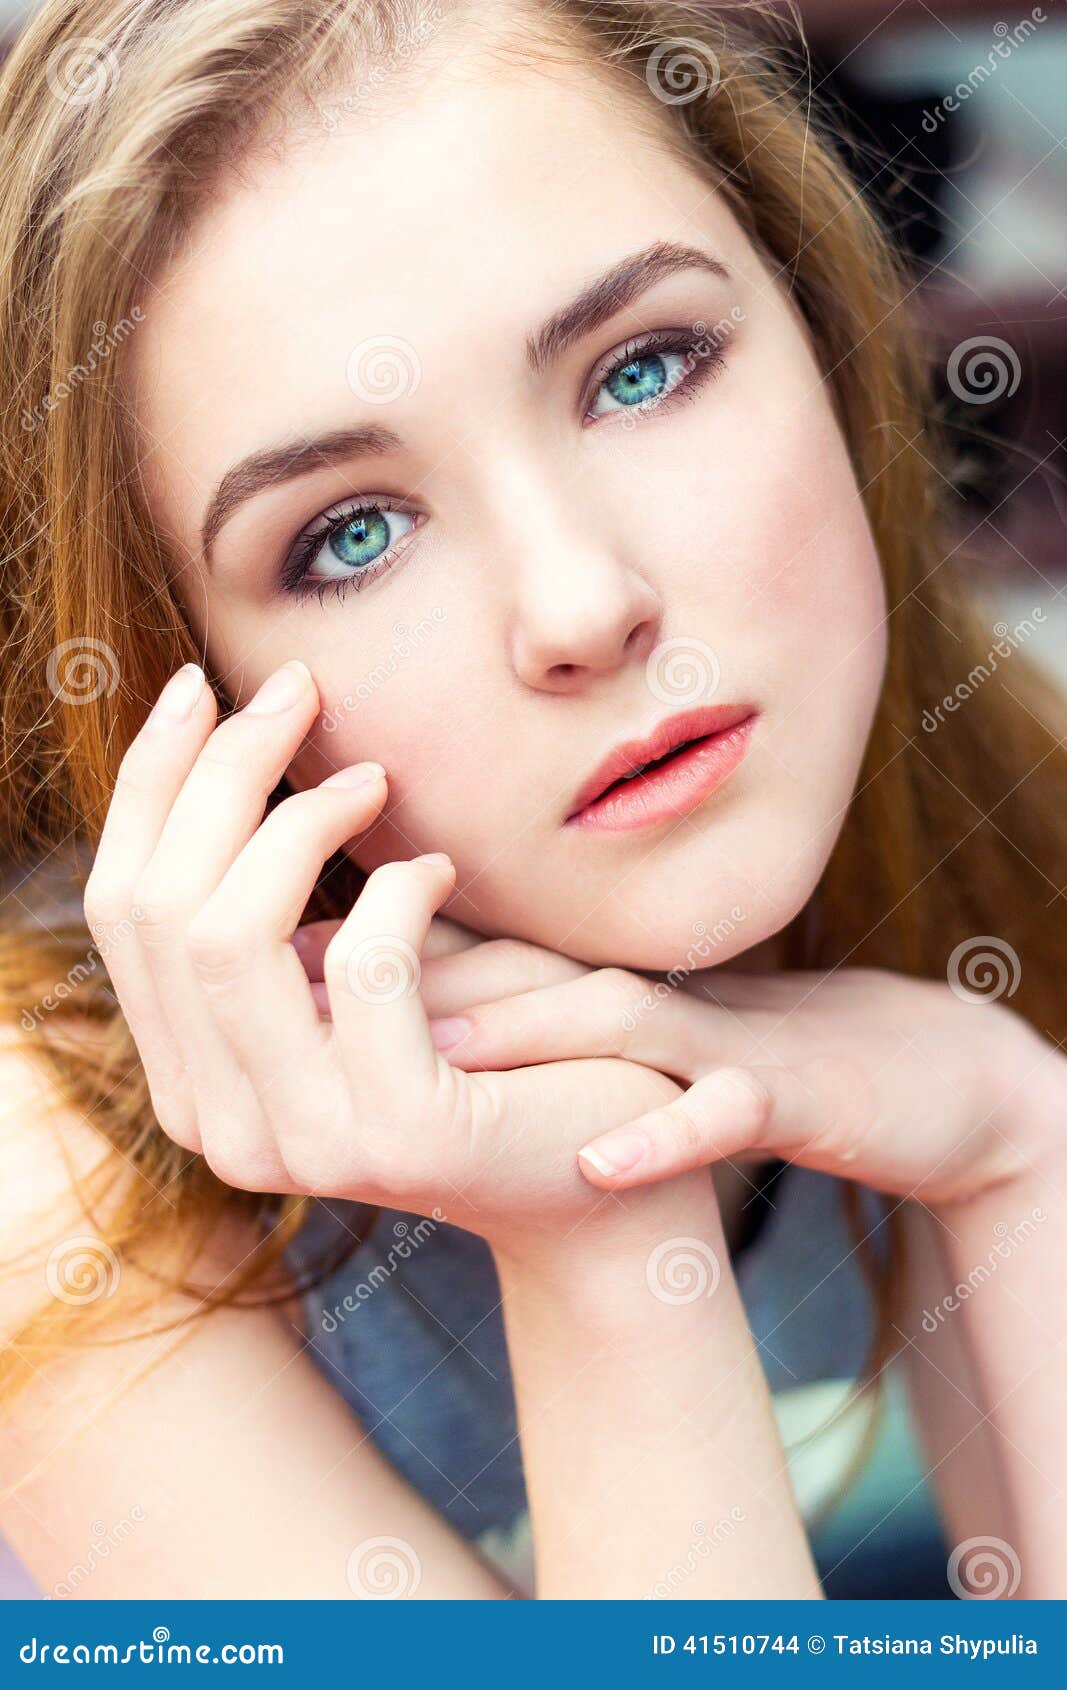 dear beautiful elegant young girl with blue eyes with regime hair seated